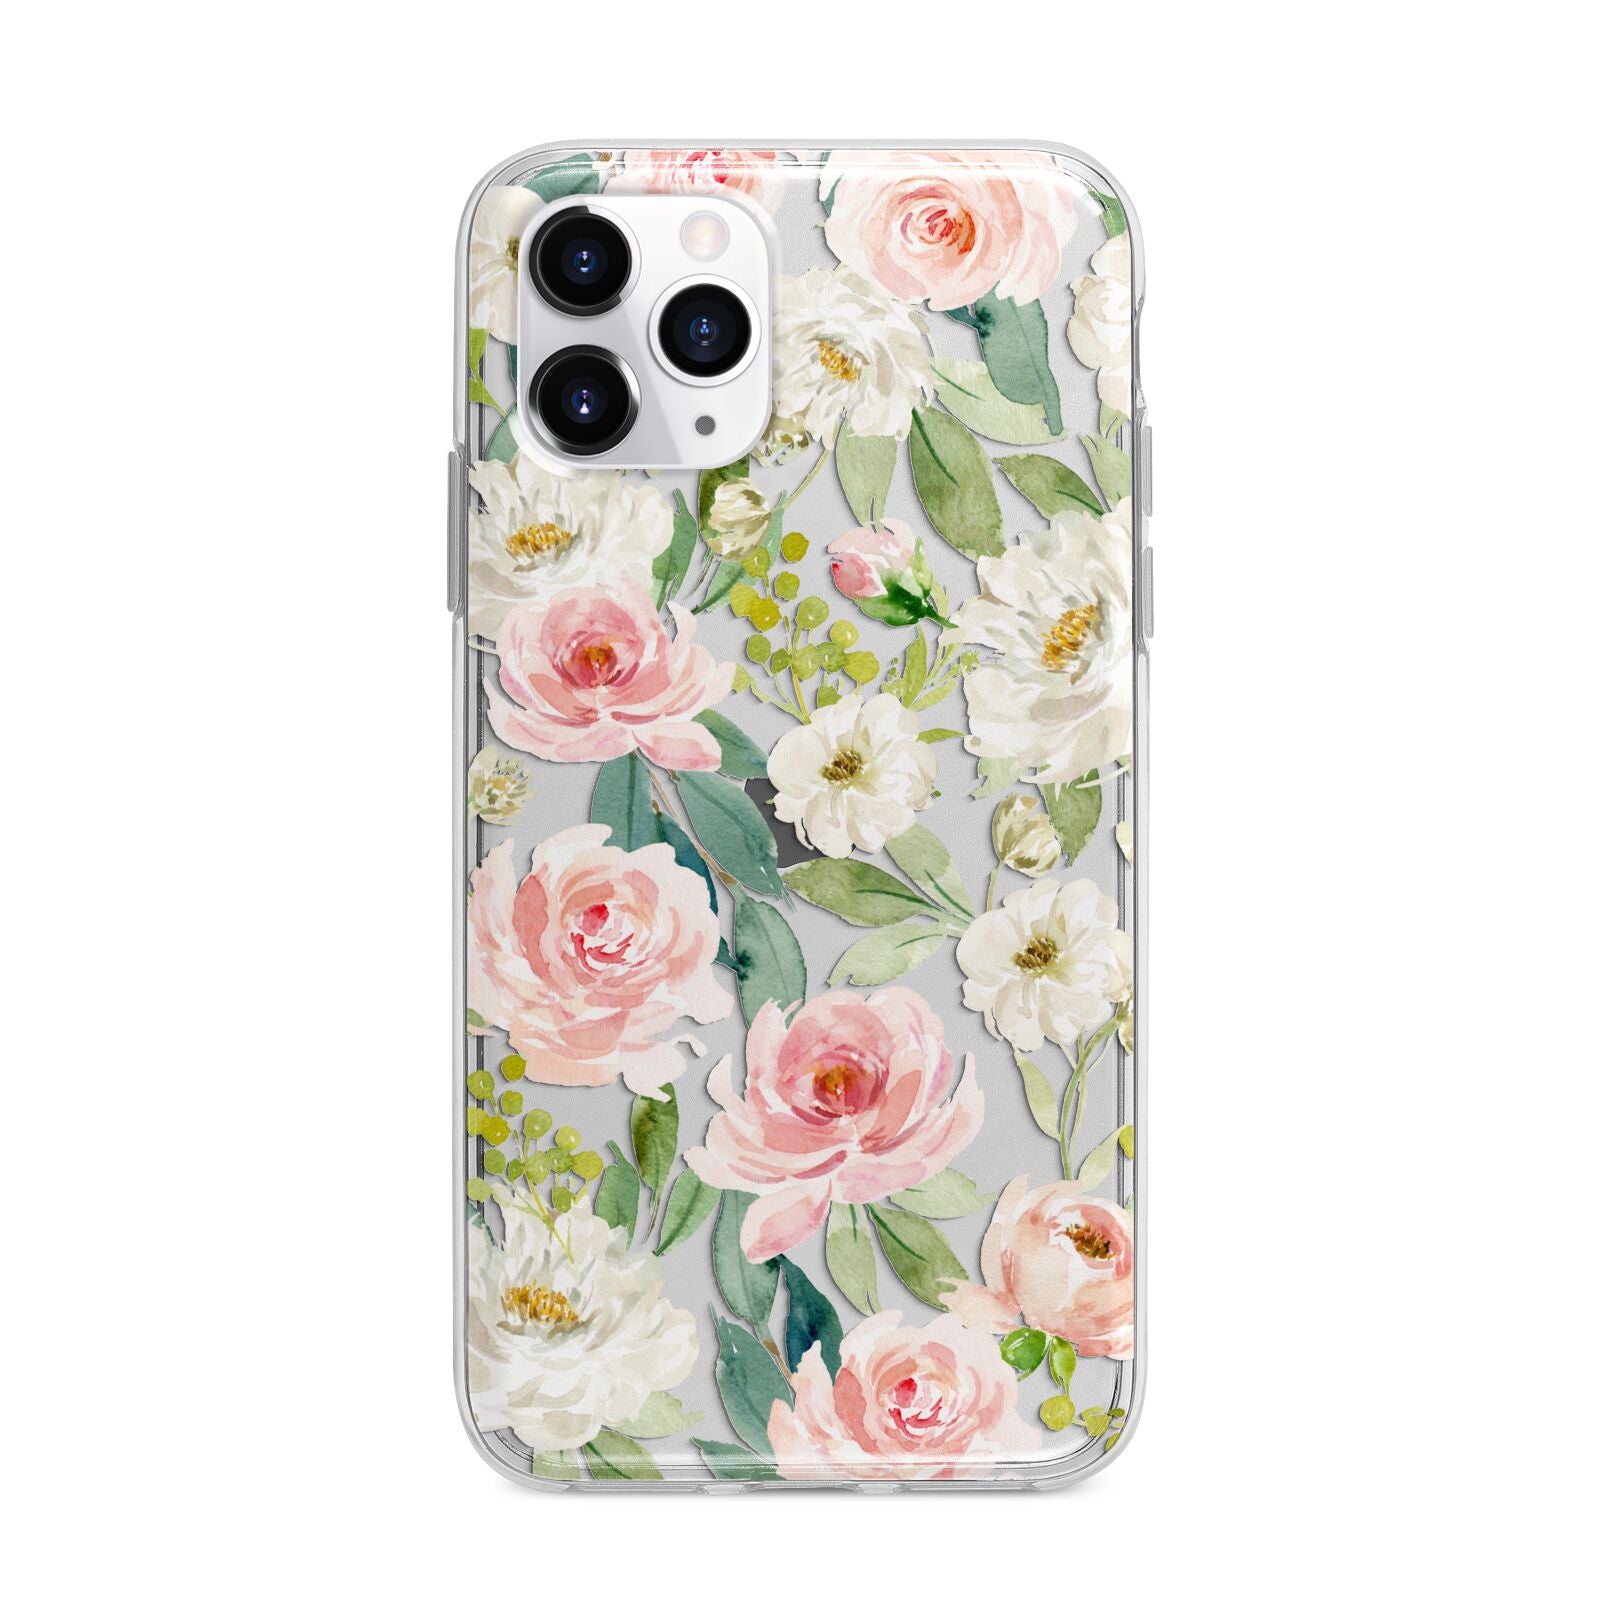 Watercolour Peonies Roses and Foliage Apple iPhone 11 Pro Max in Silver with Bumper Case